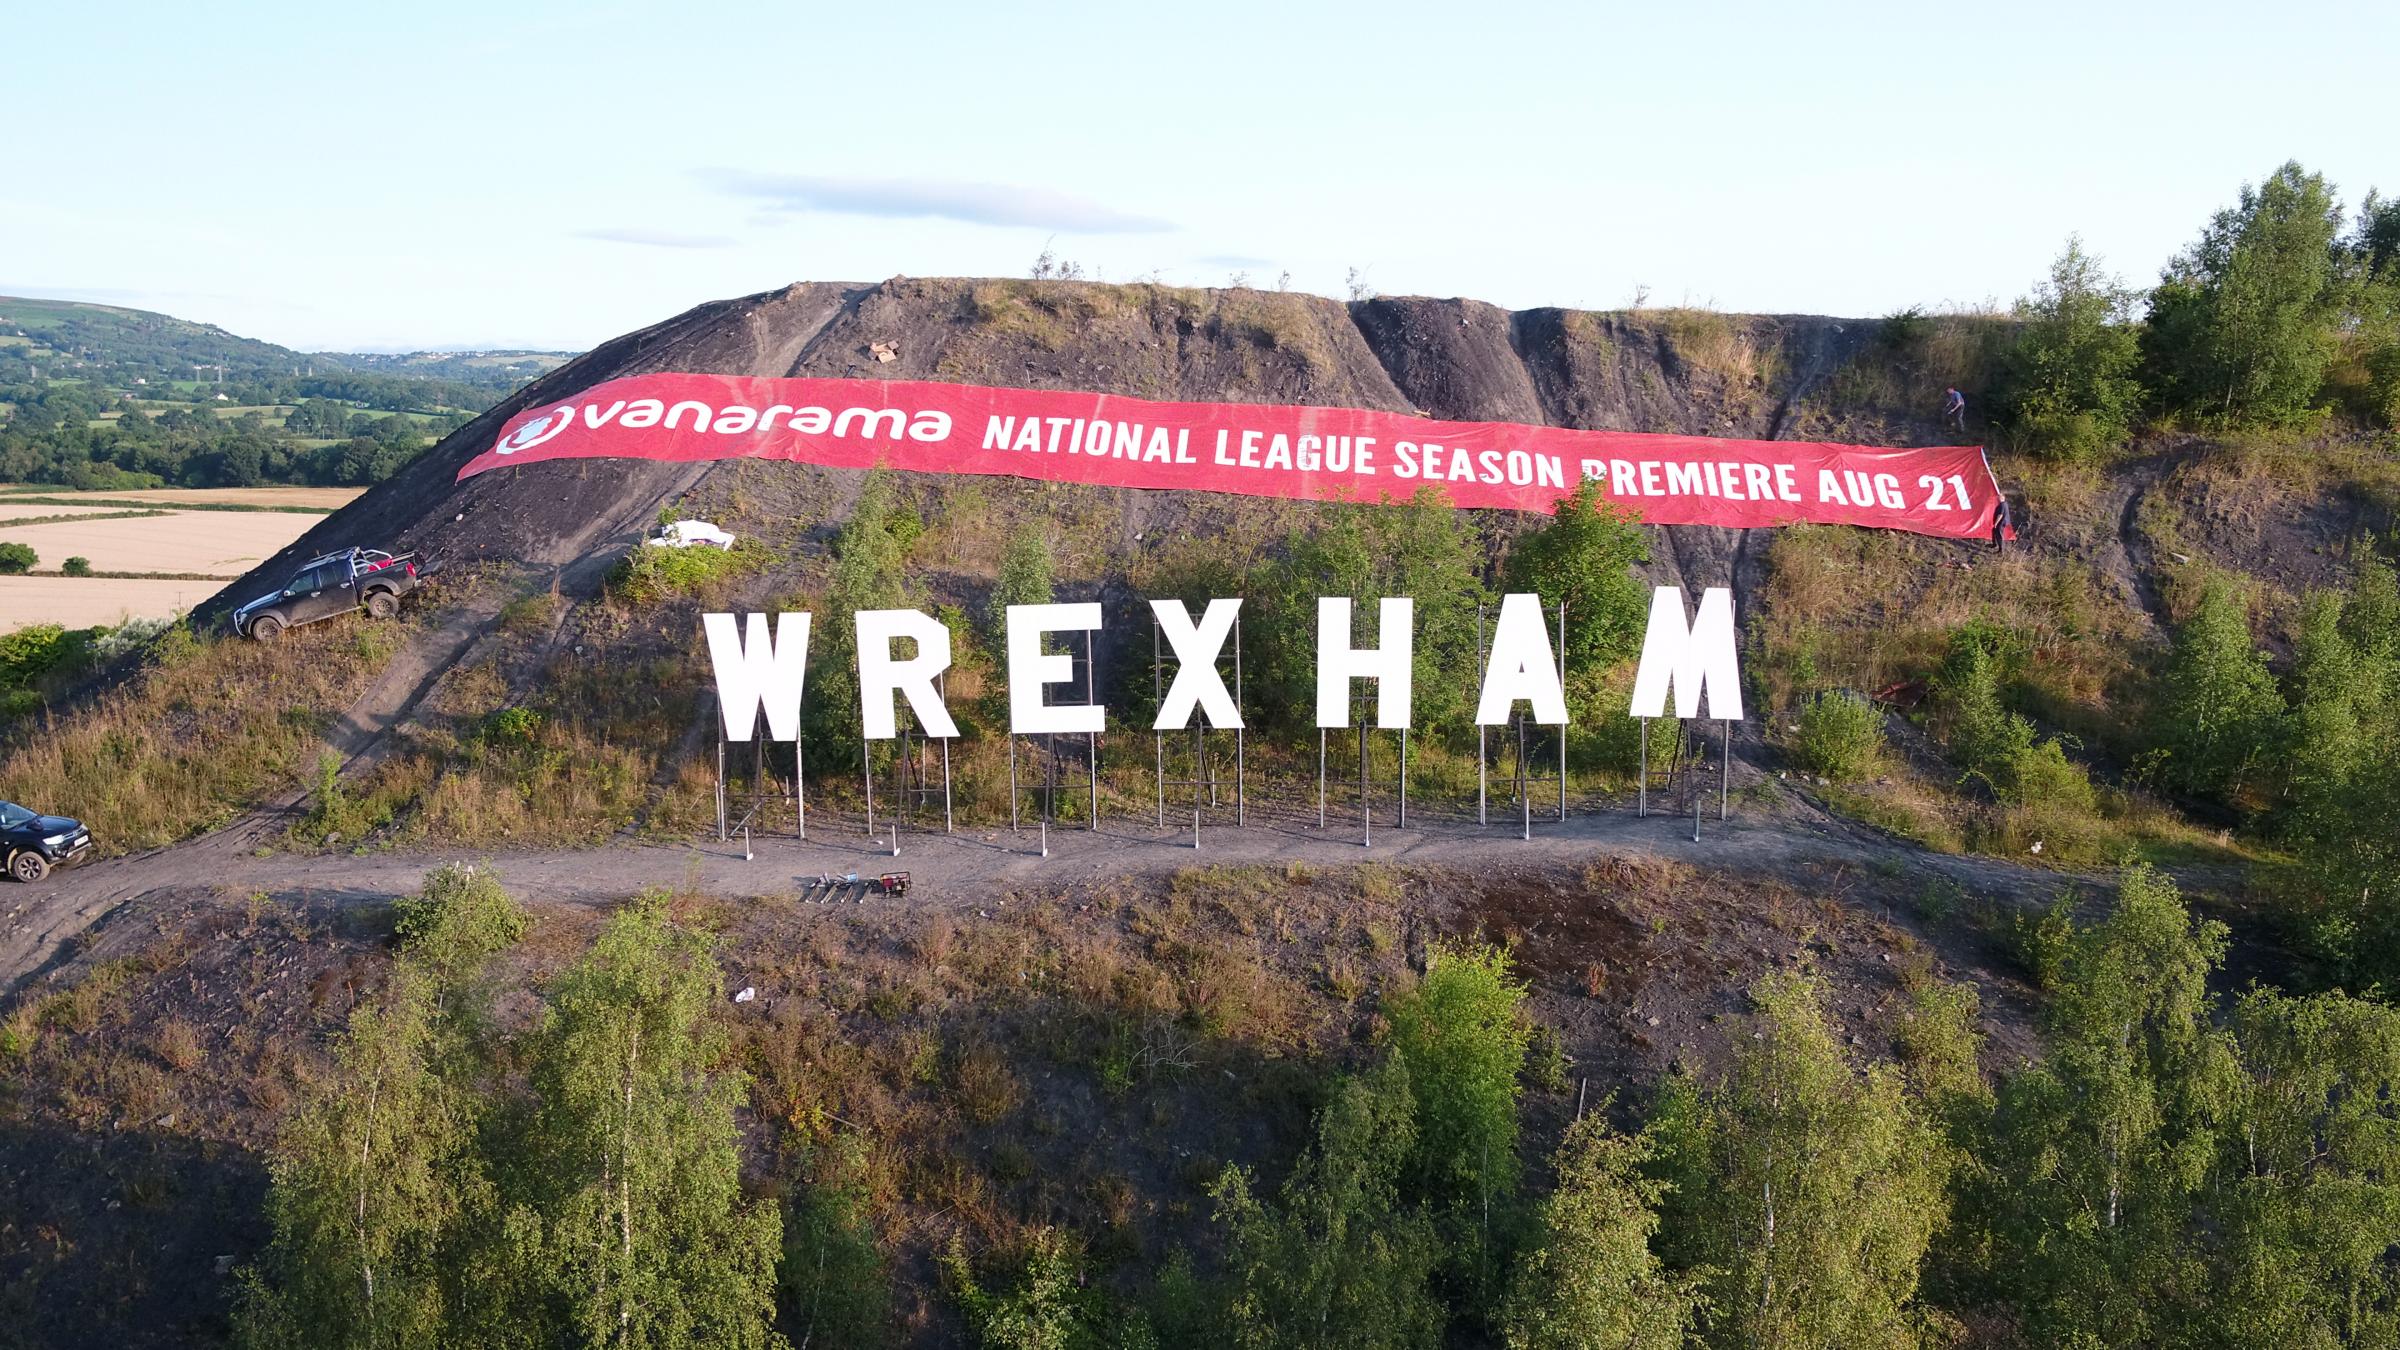 The masterminds behind Wrexhams Hollywood-style sign have come forward. [Images: Eastwood Media / Vanamara]